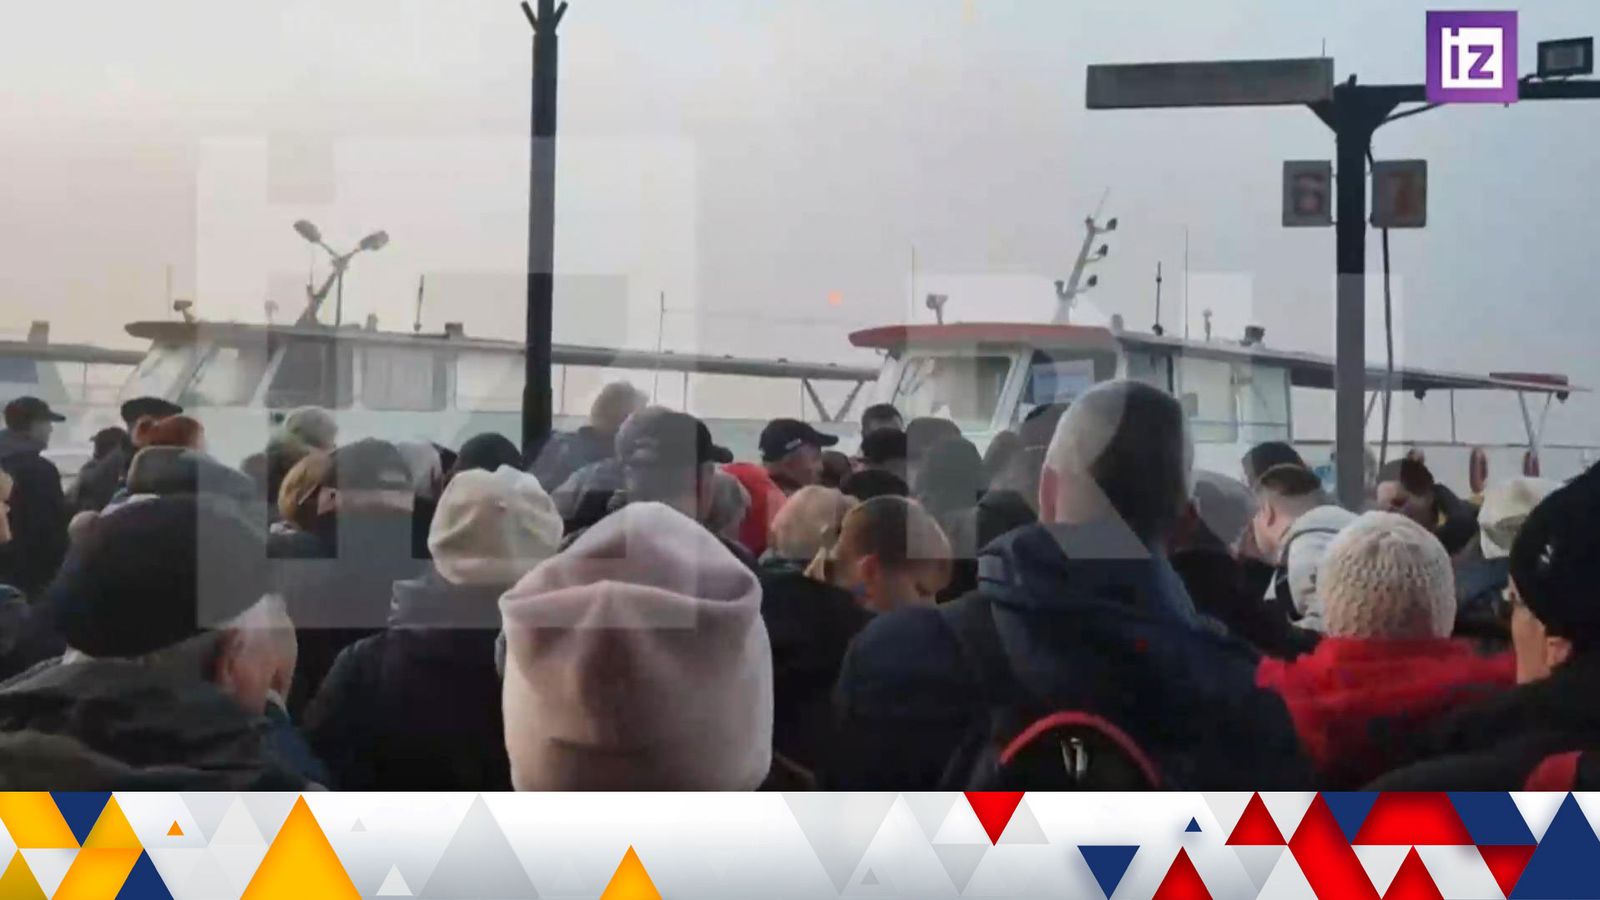 Kherson residents evacuate by boat as Putin declares martial law in four occupied regions of Ukraine